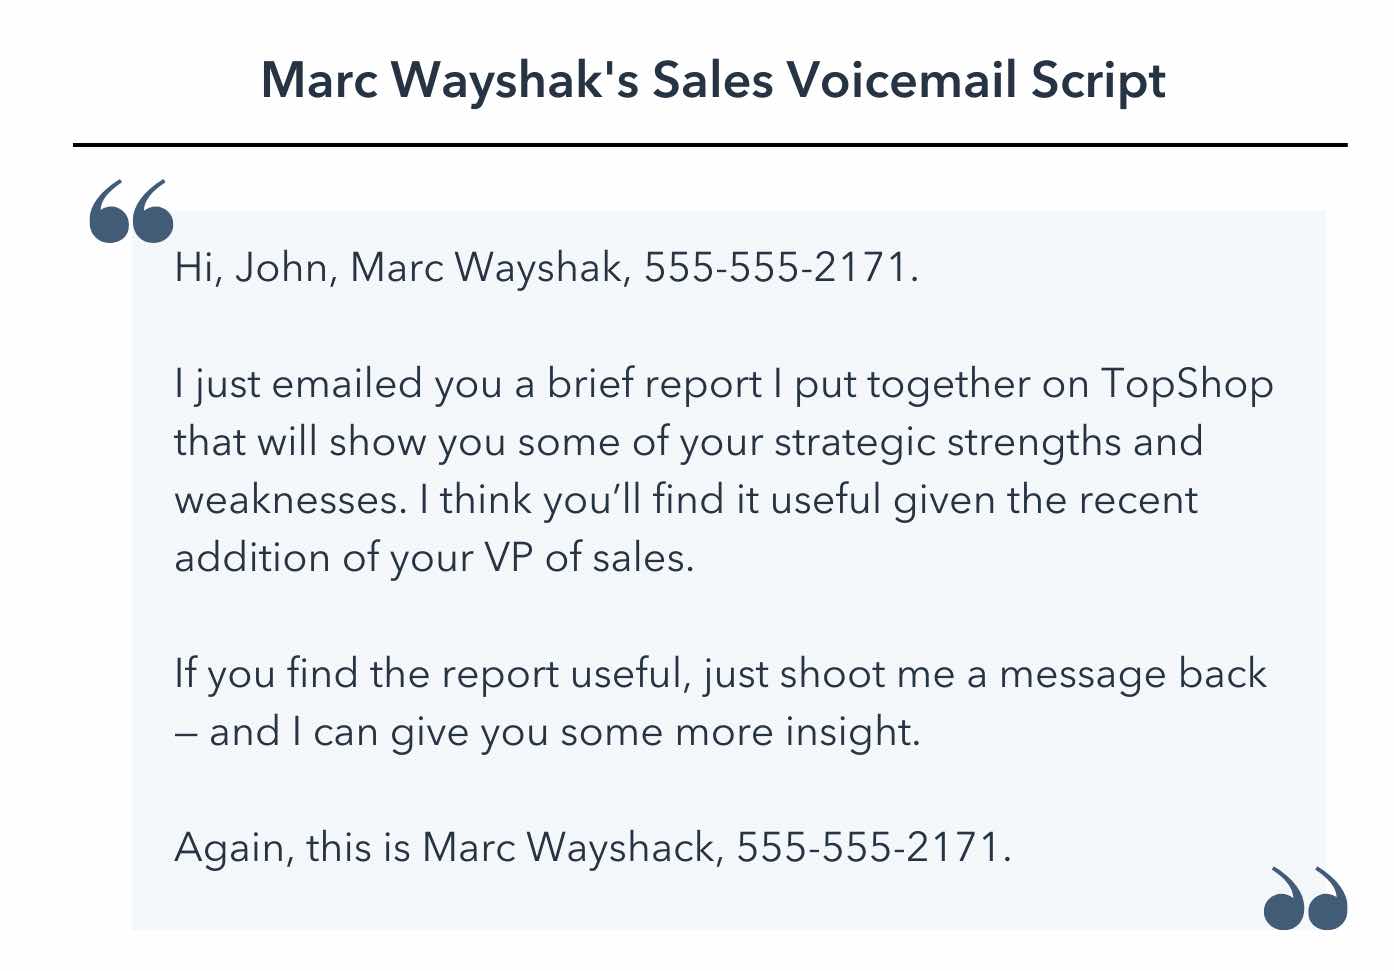 sales voicemail template, Hi, John, Marc Wayshak, 555-555-2171. I just emailed you a brief report I put together on TopShop that will show you some of your strategic strengths and weaknesses. I think you’ll find it useful given the recent addition of your VP of sales. If you find the report useful, just shoot me a message back — and I can give you some more insight. Again, this is Marc Wayshack, 555-555-2171.